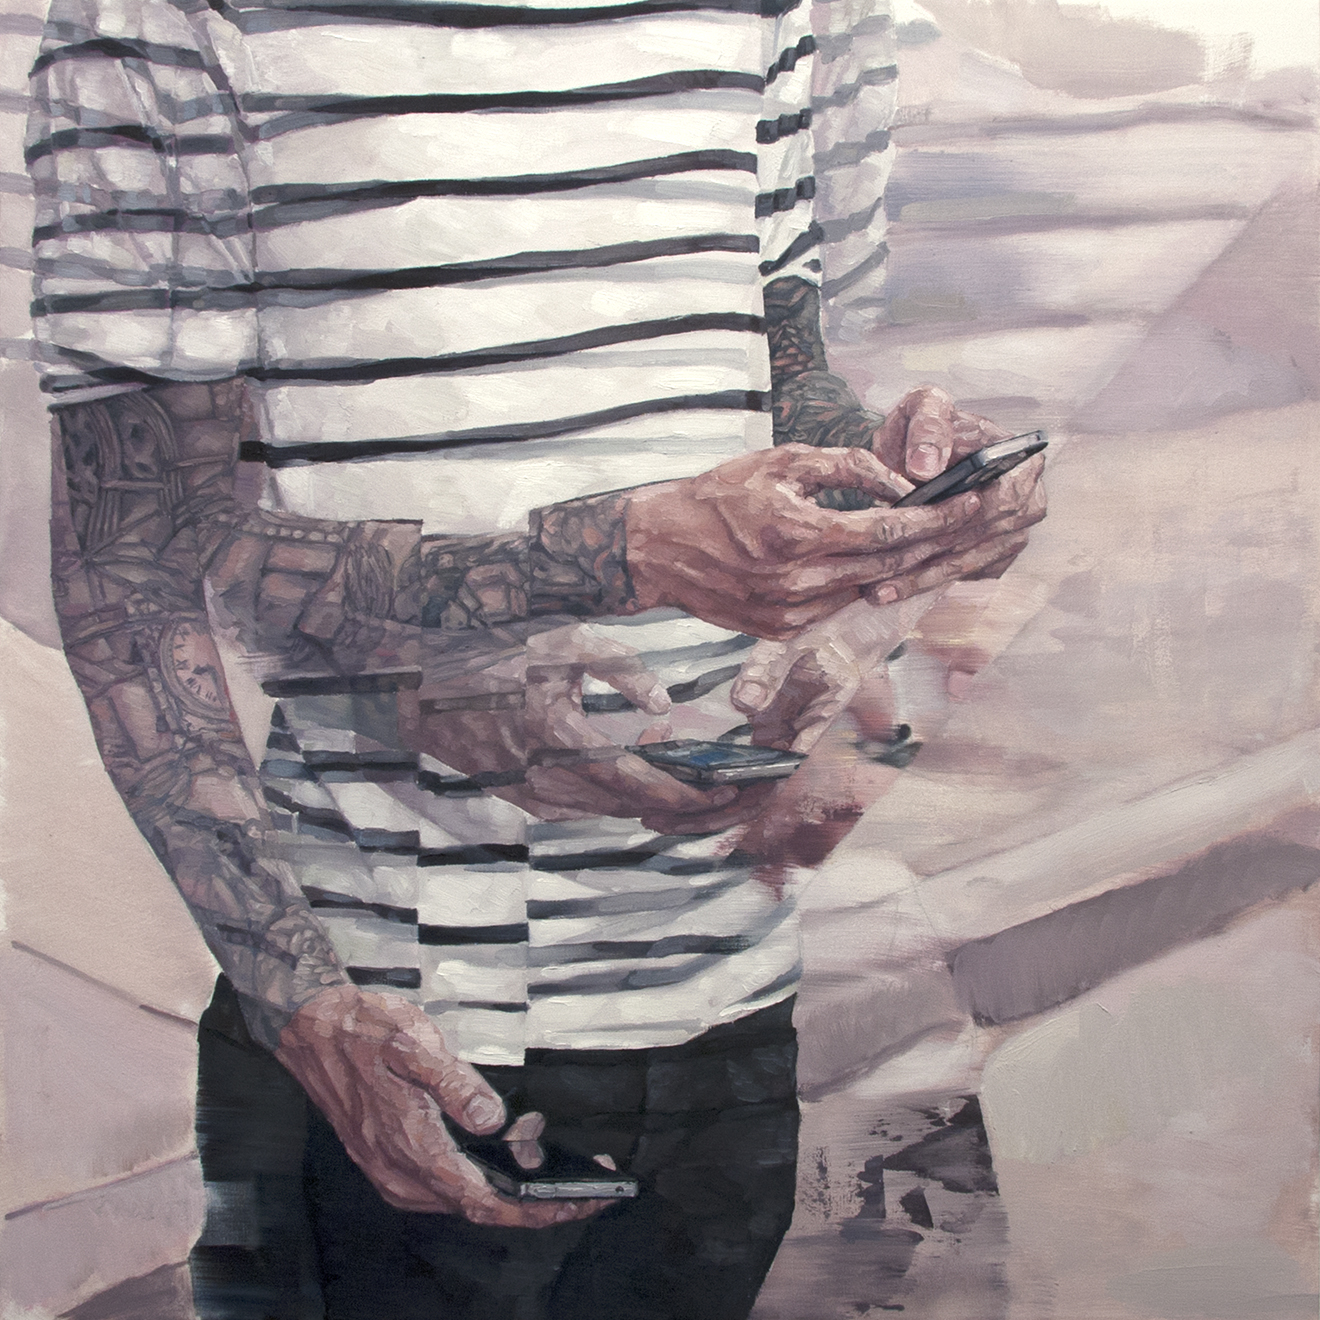 ©Adam Lupton - What’s in store for me in the direction I don’t take?. Pintura | Painting